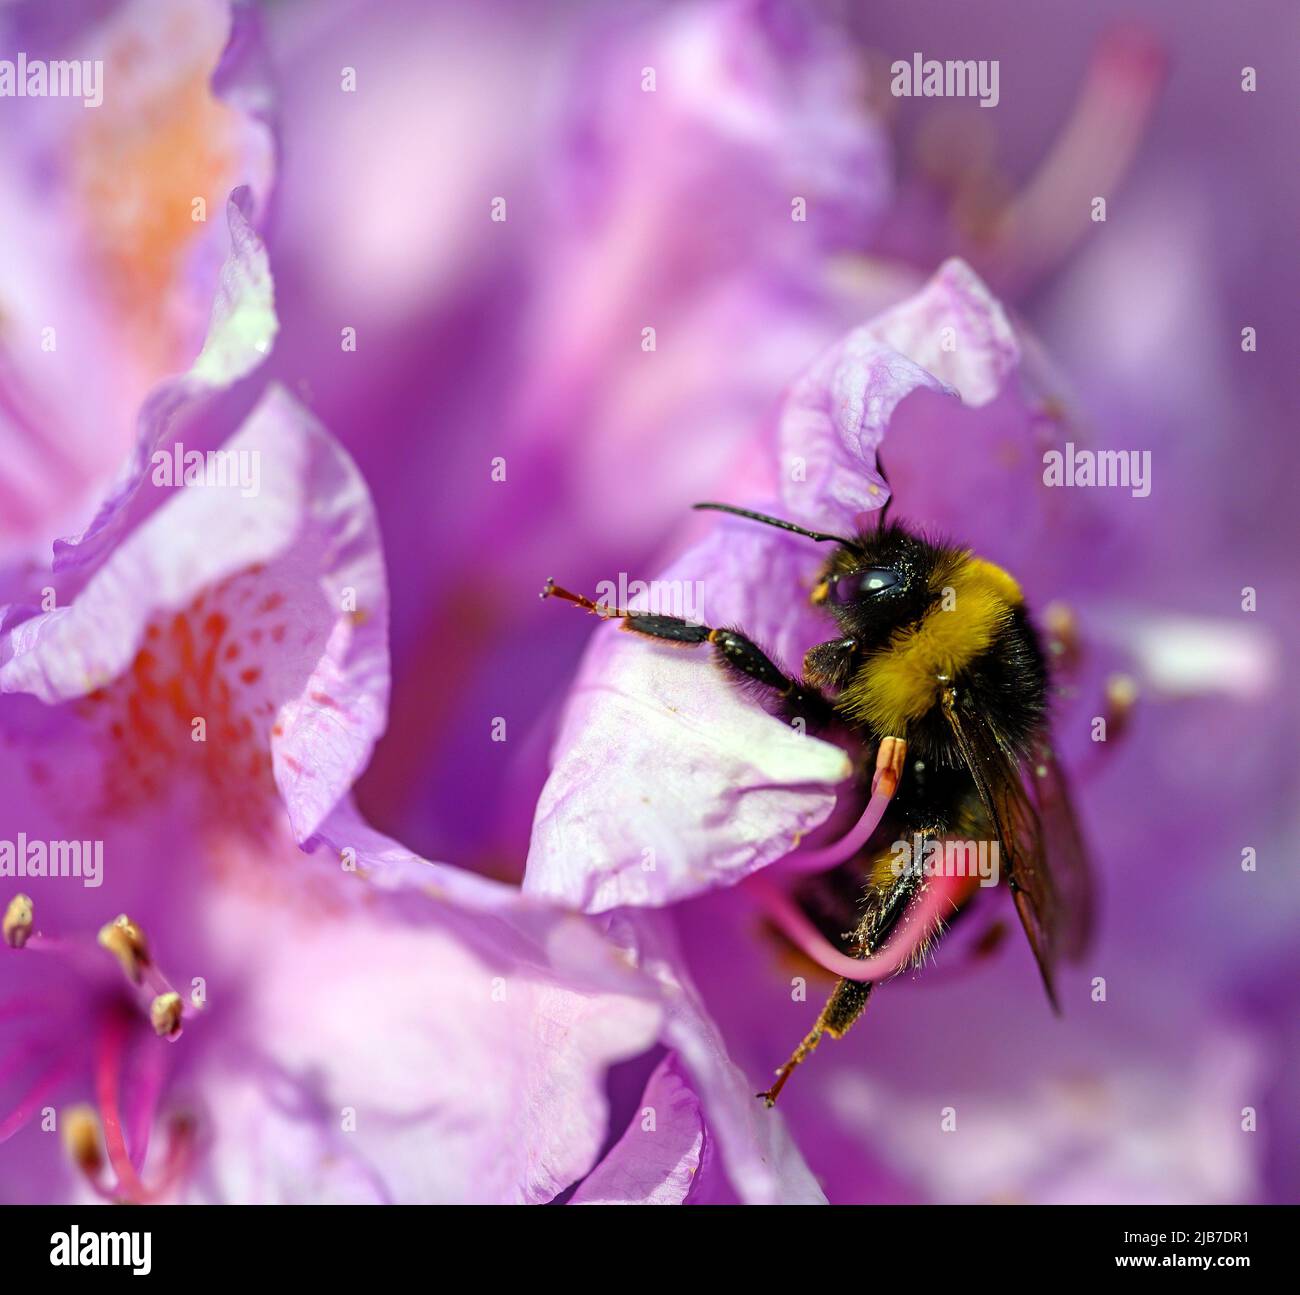 A bumblebee pollinating a pink flower. The bee has pollen on its leg as it walks over the flower. The bumble bee has black and yellow stripes. Stock Photo